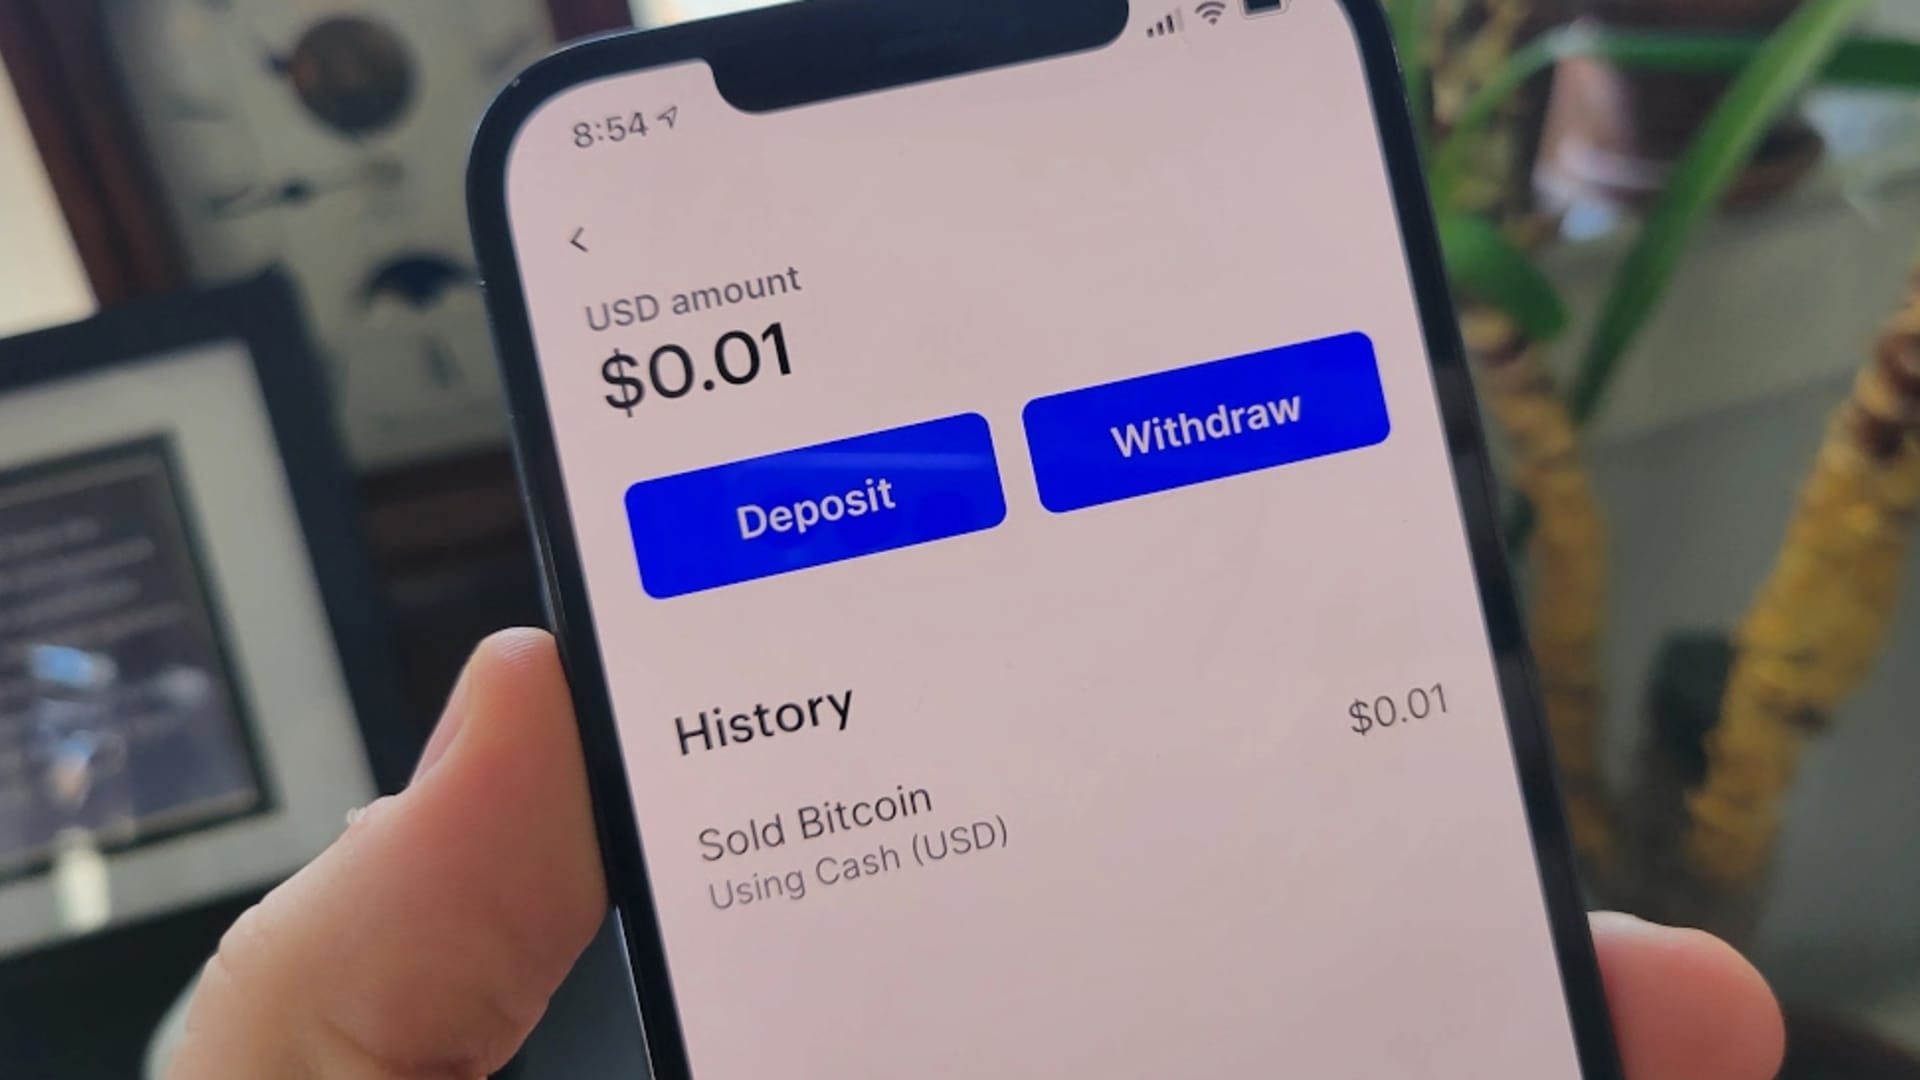 How to withdraw funds from Coinbase